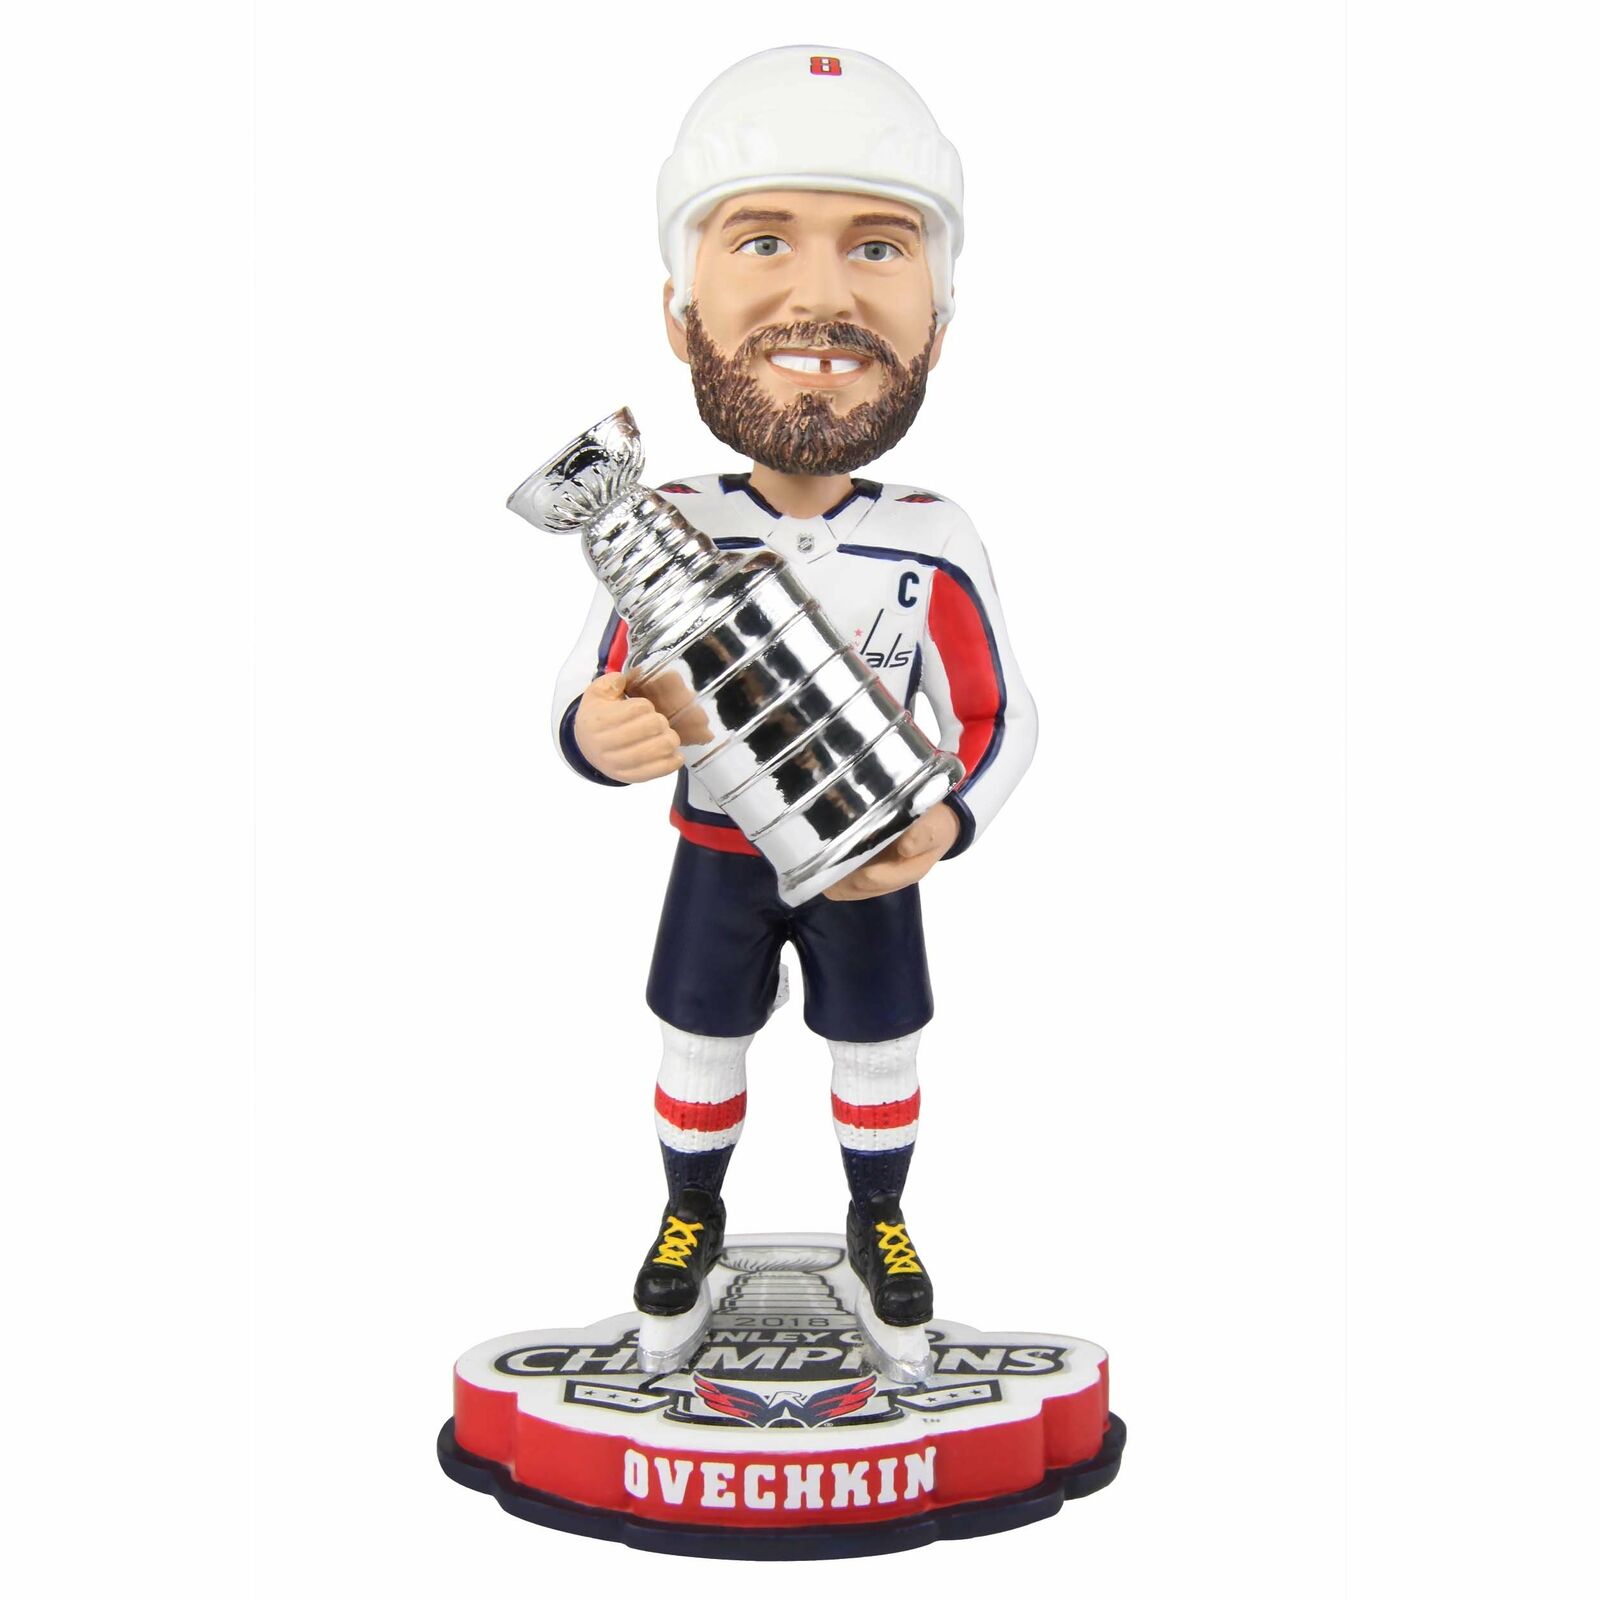 Alexander Ovechkin Washington Capitals 2018 Stanley Cup Champions Bobblehead NHL